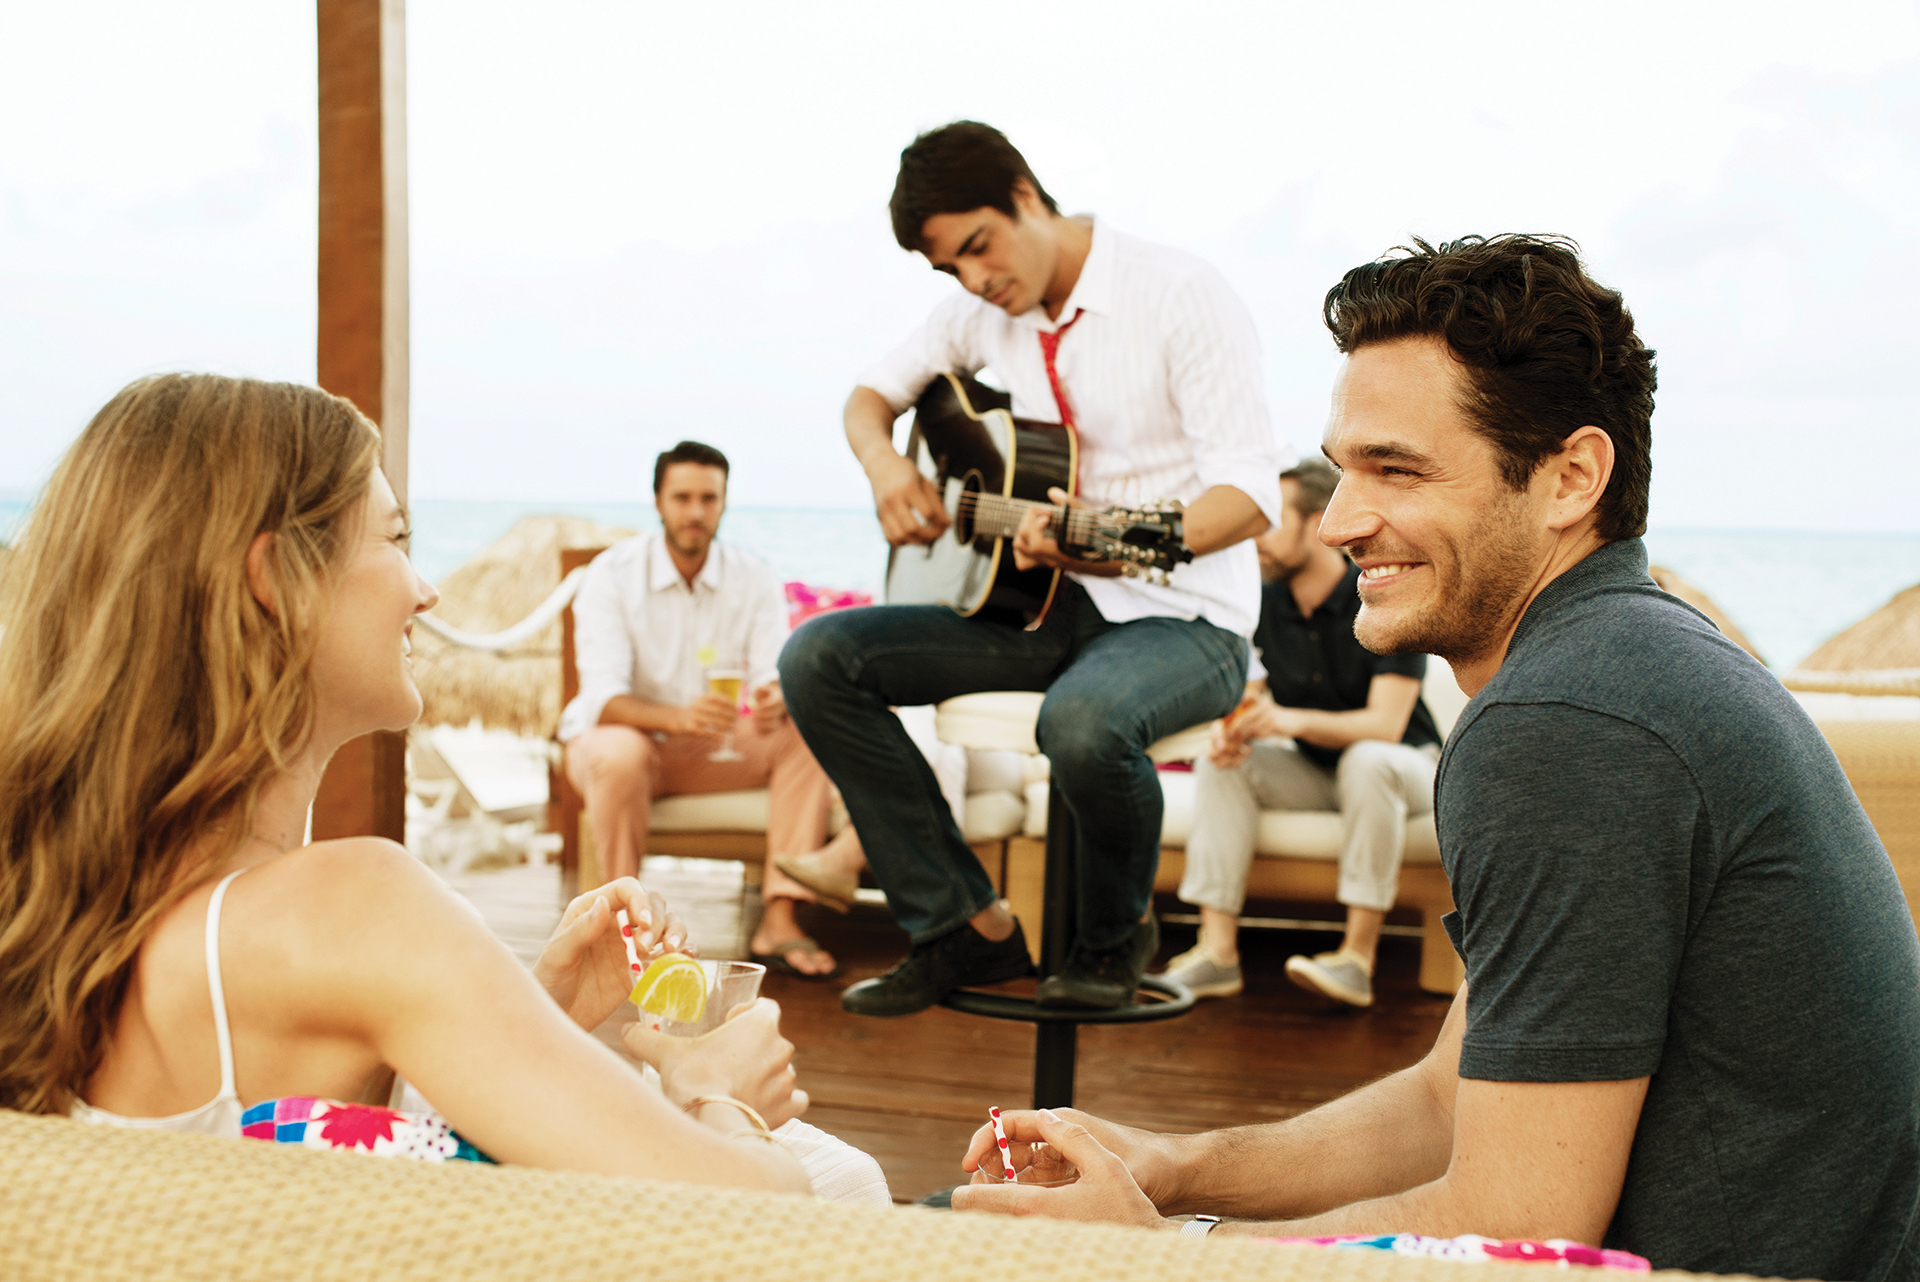 Live music and a romantic ambiance in a Playa Mujeres resort